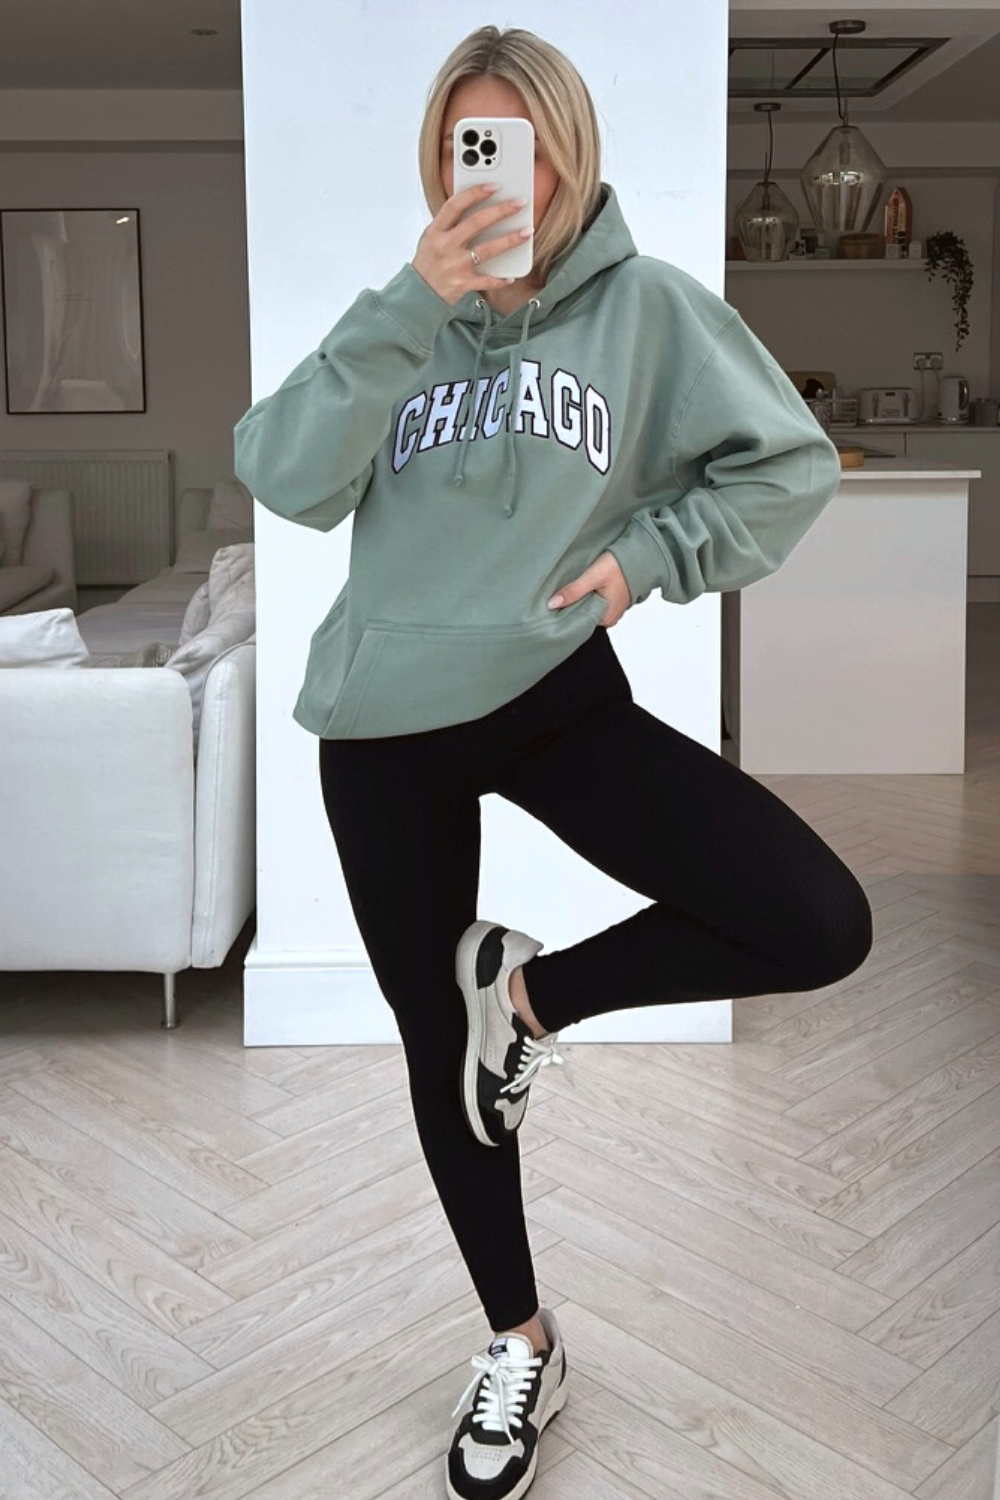 Chicago sage embroidered hoodie & legging coord